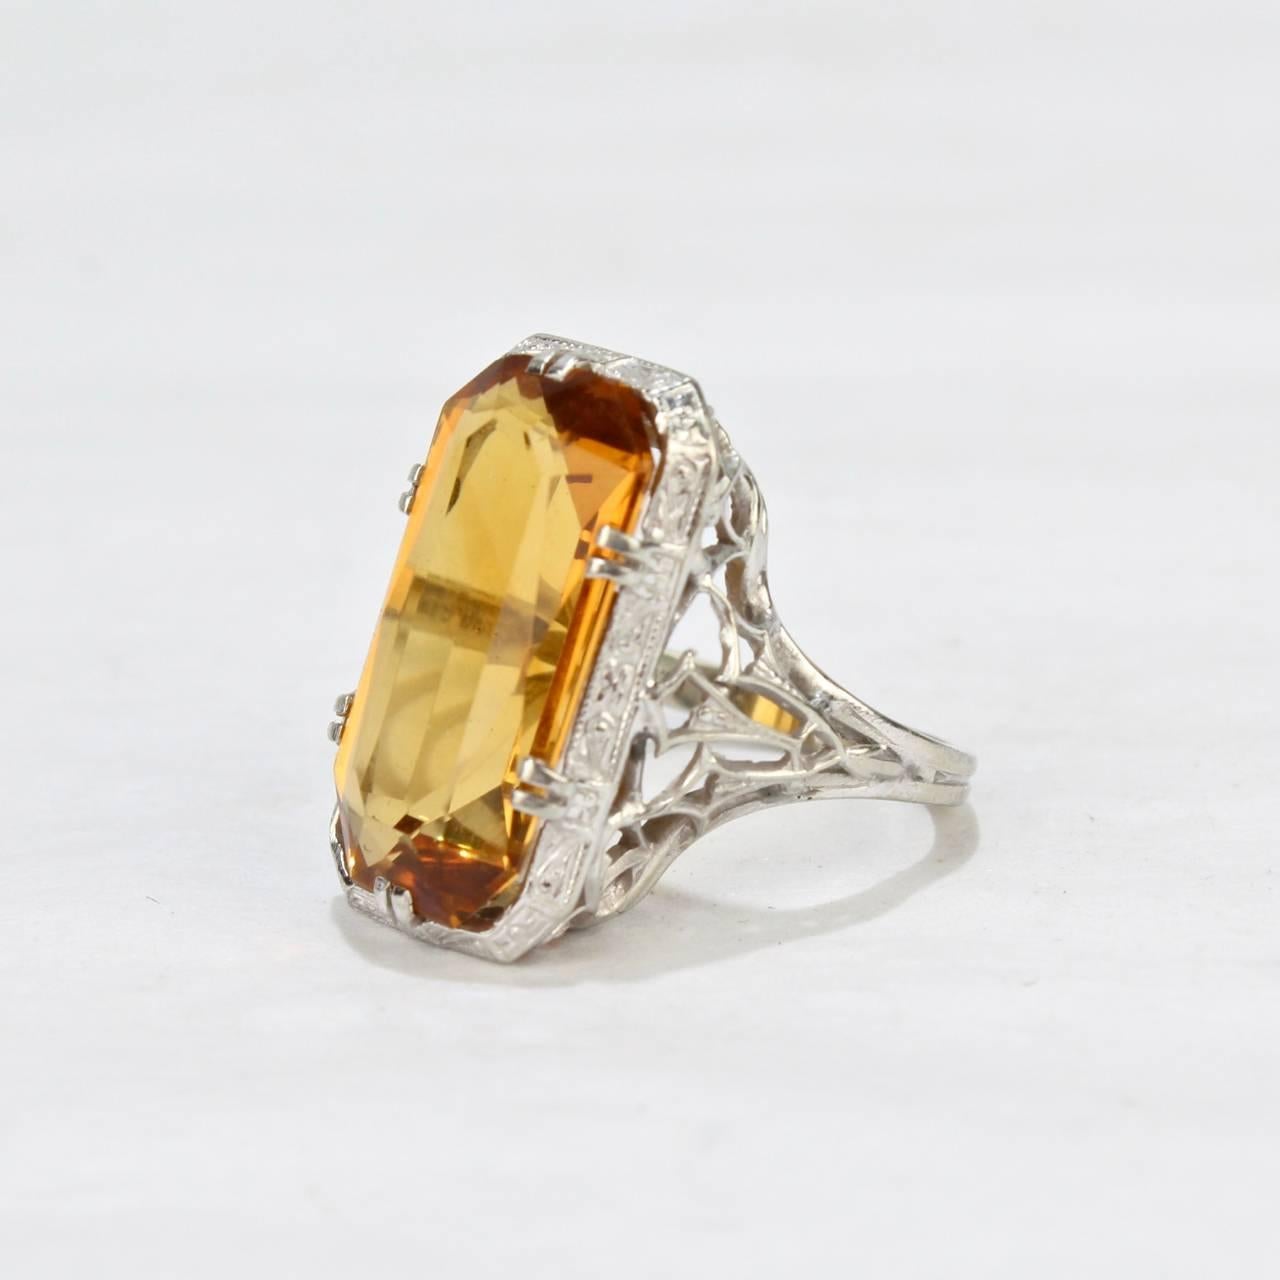 A fine emerald-cut Citrine cocktail ring 

With an Art Deco style 18-karat white gold filigree setting

The shank is stamped MG 18K

Ring size: ca. size 4
Stone length: just over 2/3 in.
Stone width: ca. just over 1/3 in.
